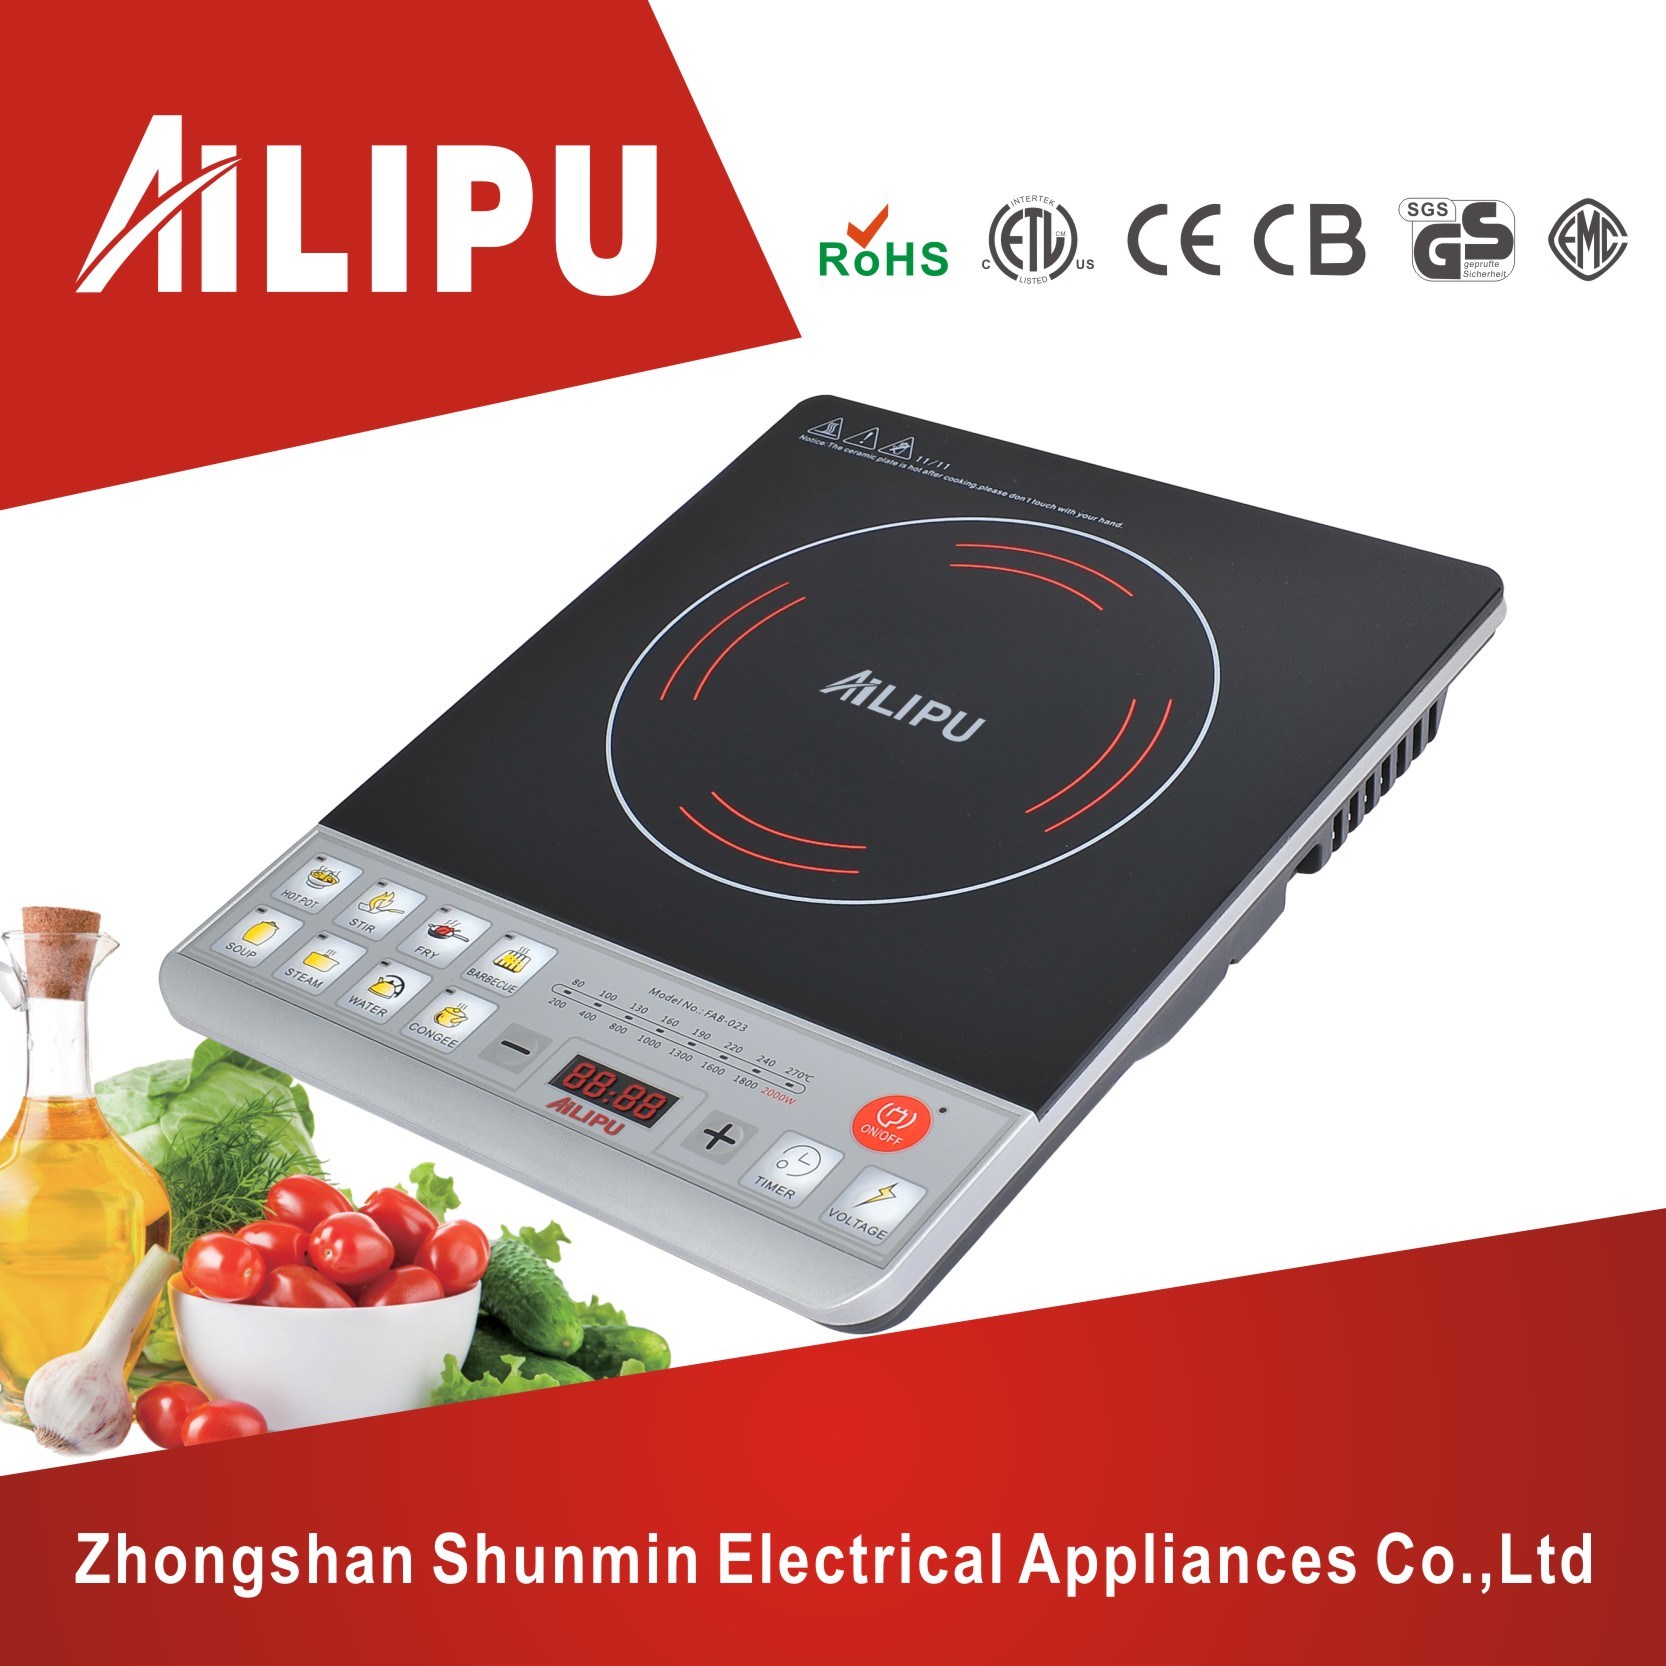 Ailipu Brand Best Selling Pushbutton Induction Cooker (ALP-18B1) for Middle East